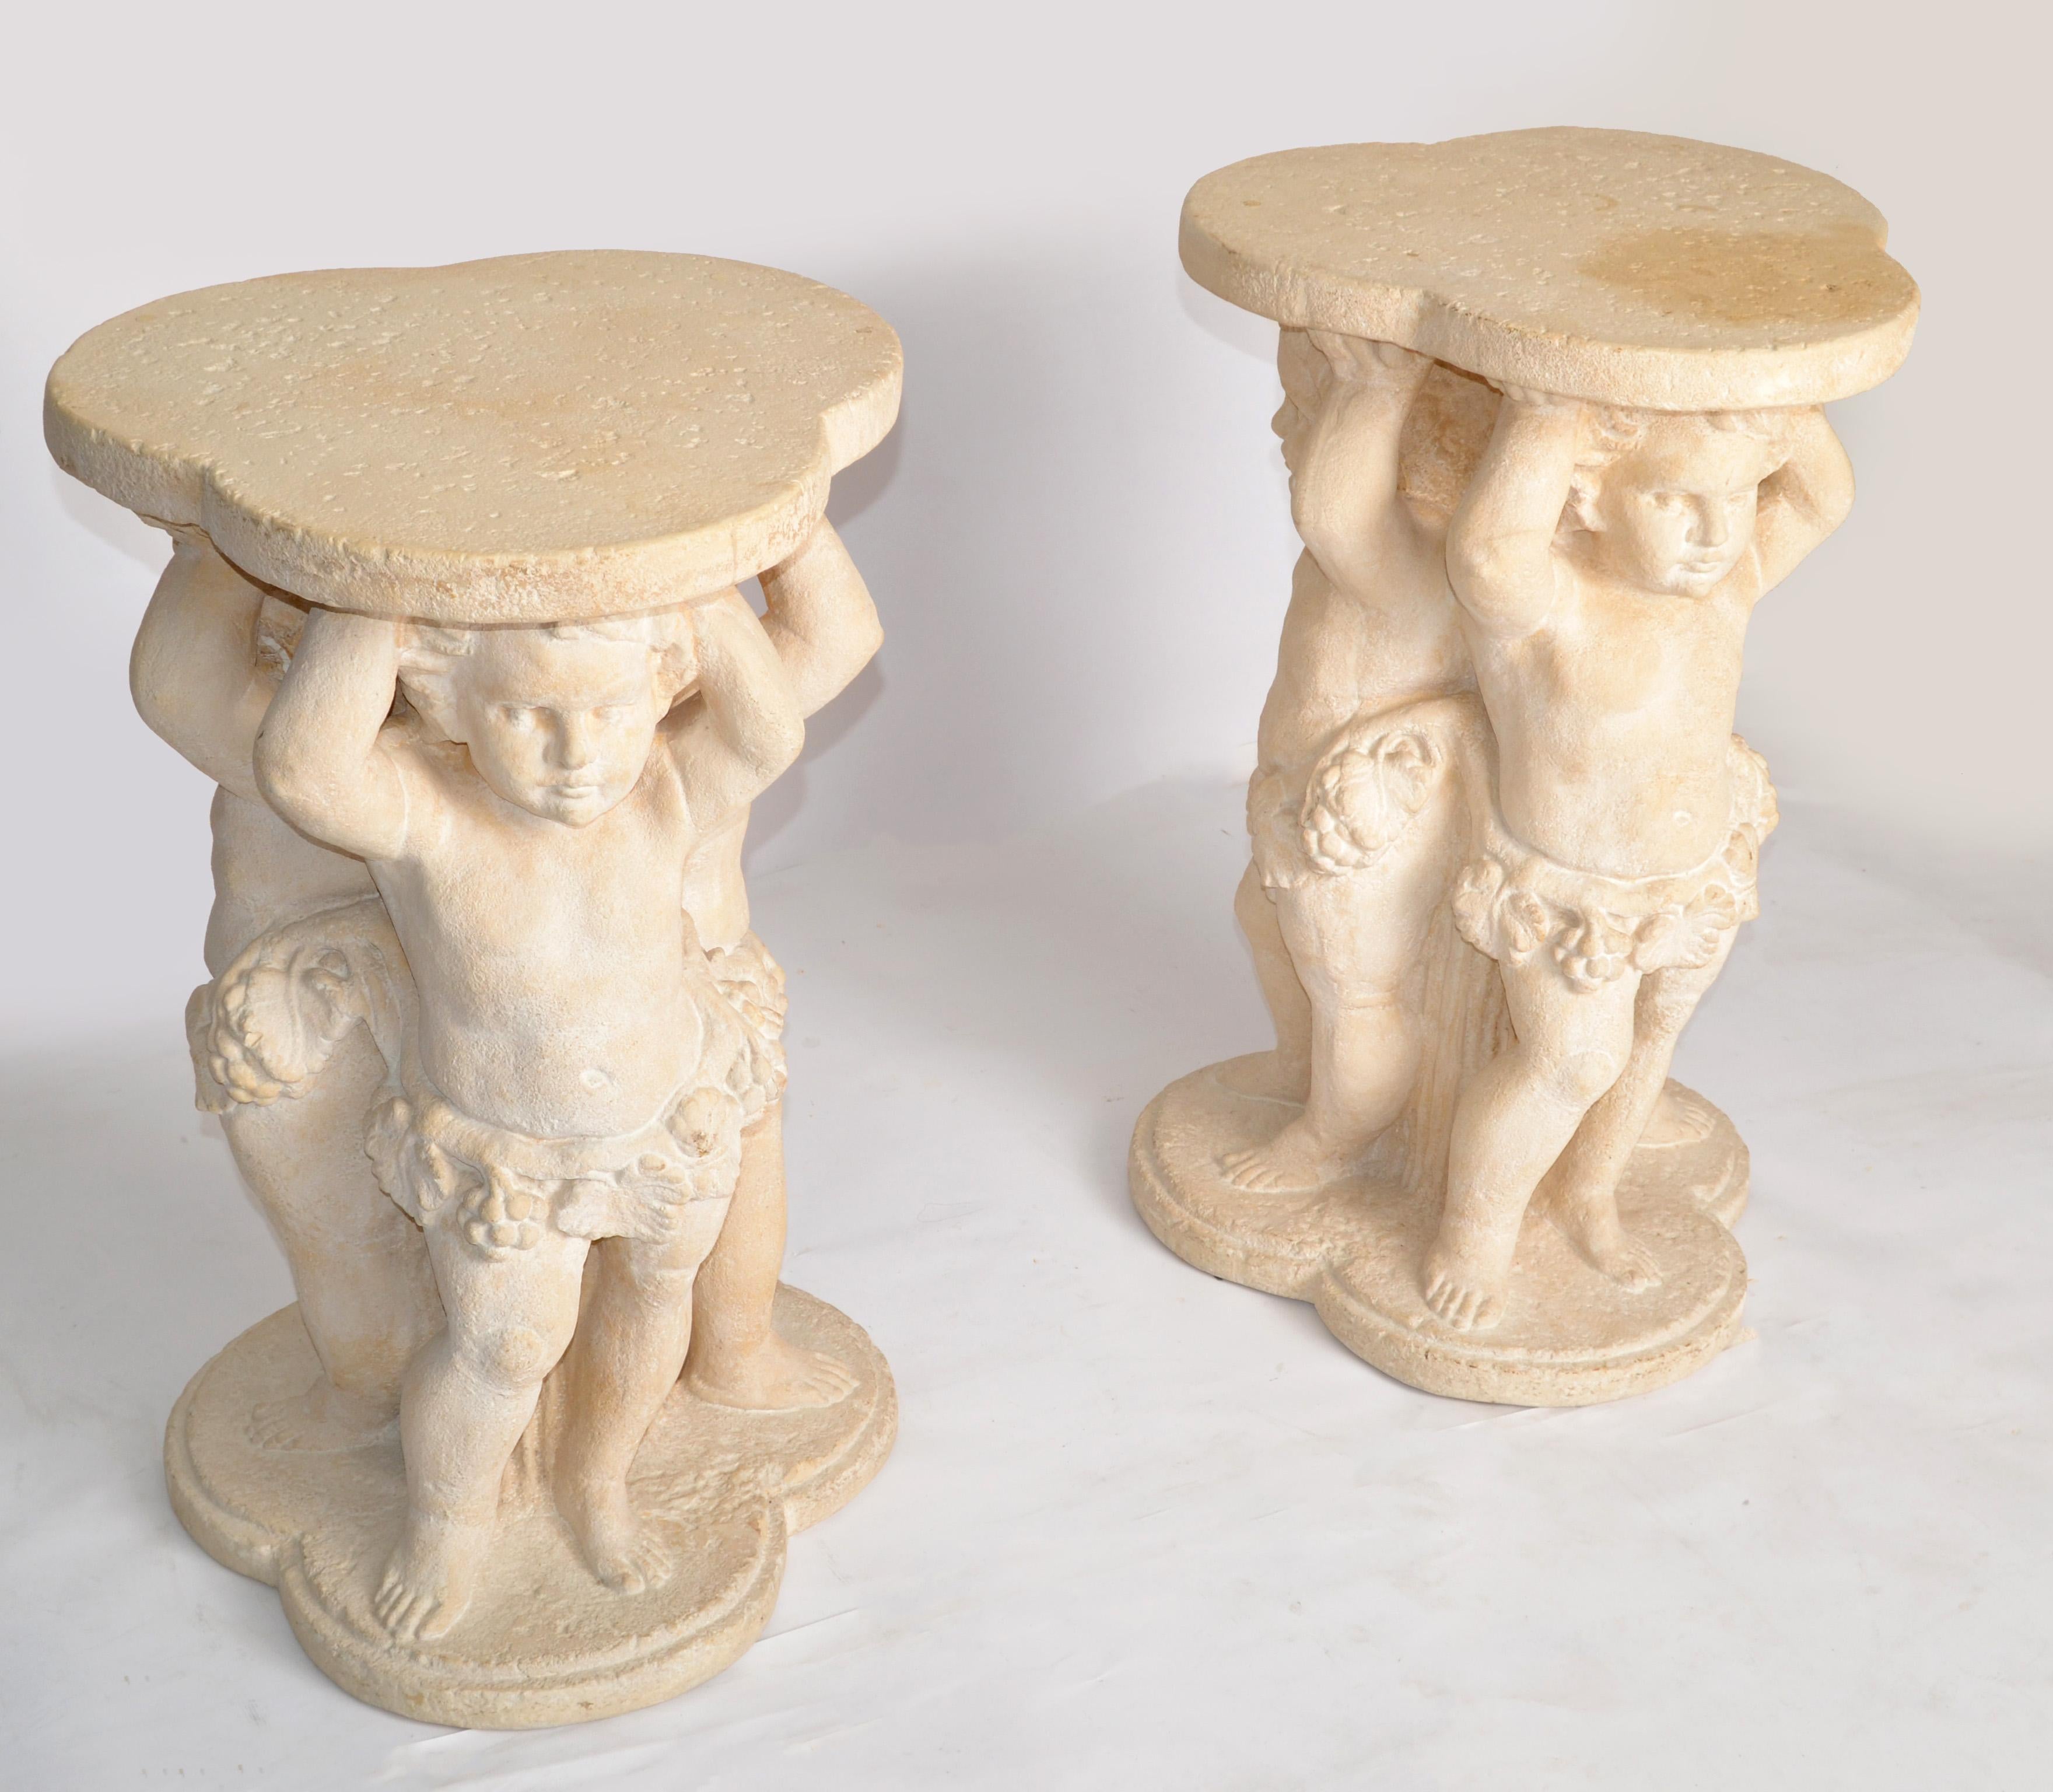 Charming early 20th Century Pair of Hand-carved Stone Table Bases, Pedestal's, Columns, Stands from Italy made in circa 1940. 
Depicting 3 Angel Figurines holding a leaf shaped Top. All made out of one piece of Stone with attention to detail.